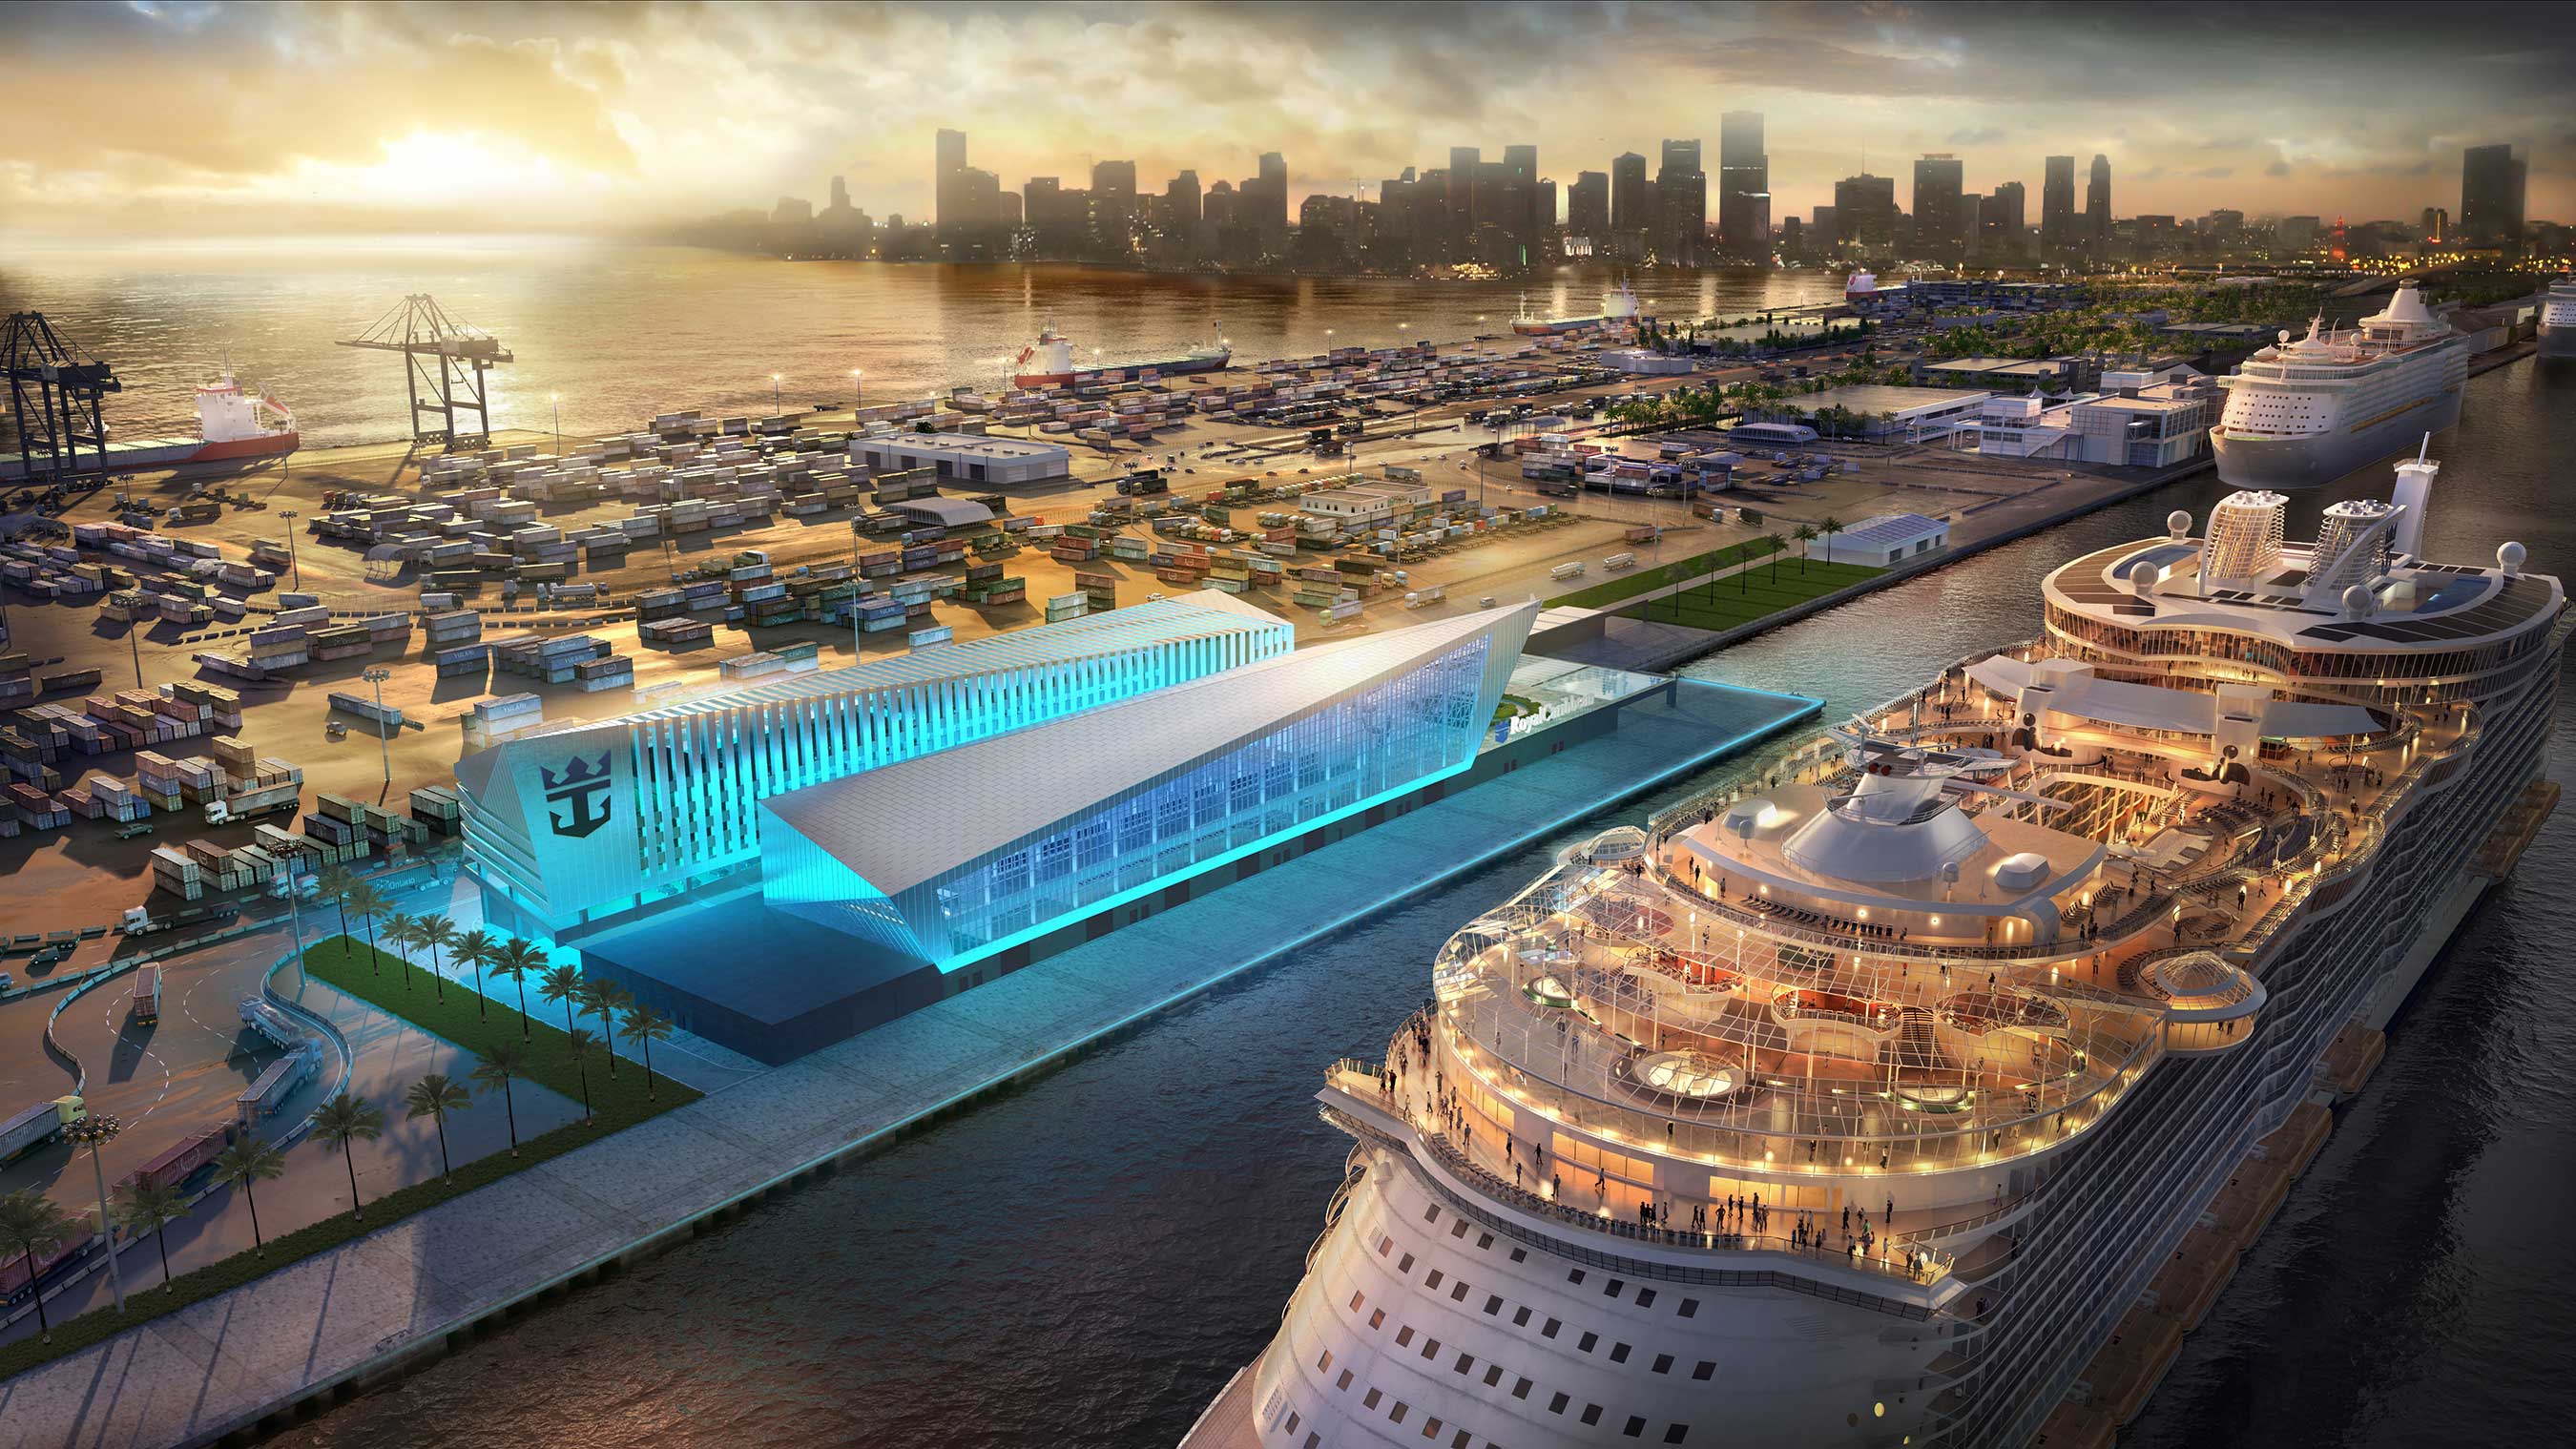 Royal Caribbean Cruises Ltd. (RCL), in agreement with Miami-Dade County, will build and operate a new, world-class terminal at PortMiami. The iconic building is scheduled for late 2018.